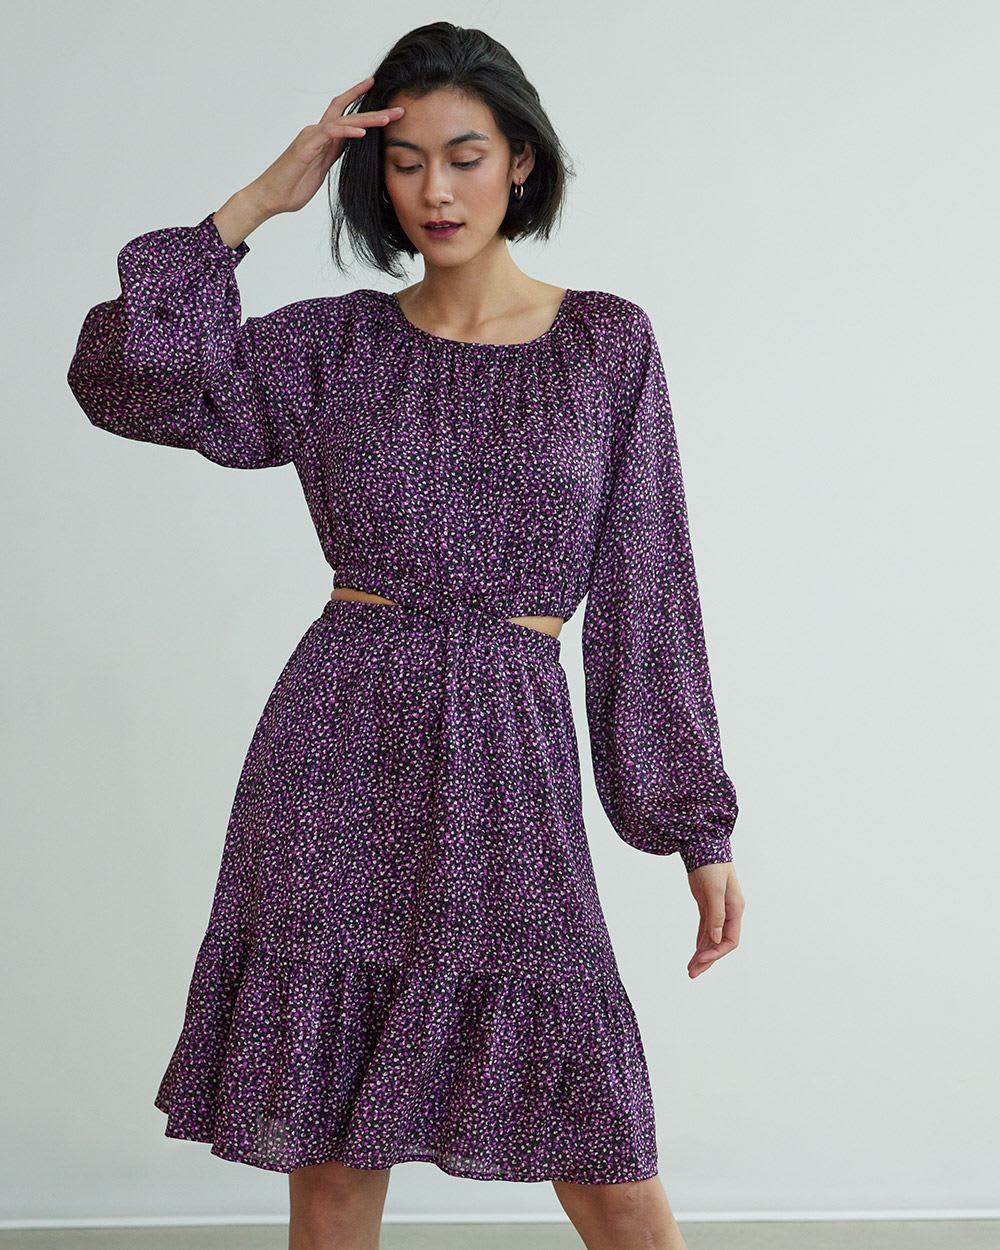 Long-Sleeve Dress with Ruffled Hem and Lateral Cut-Outs